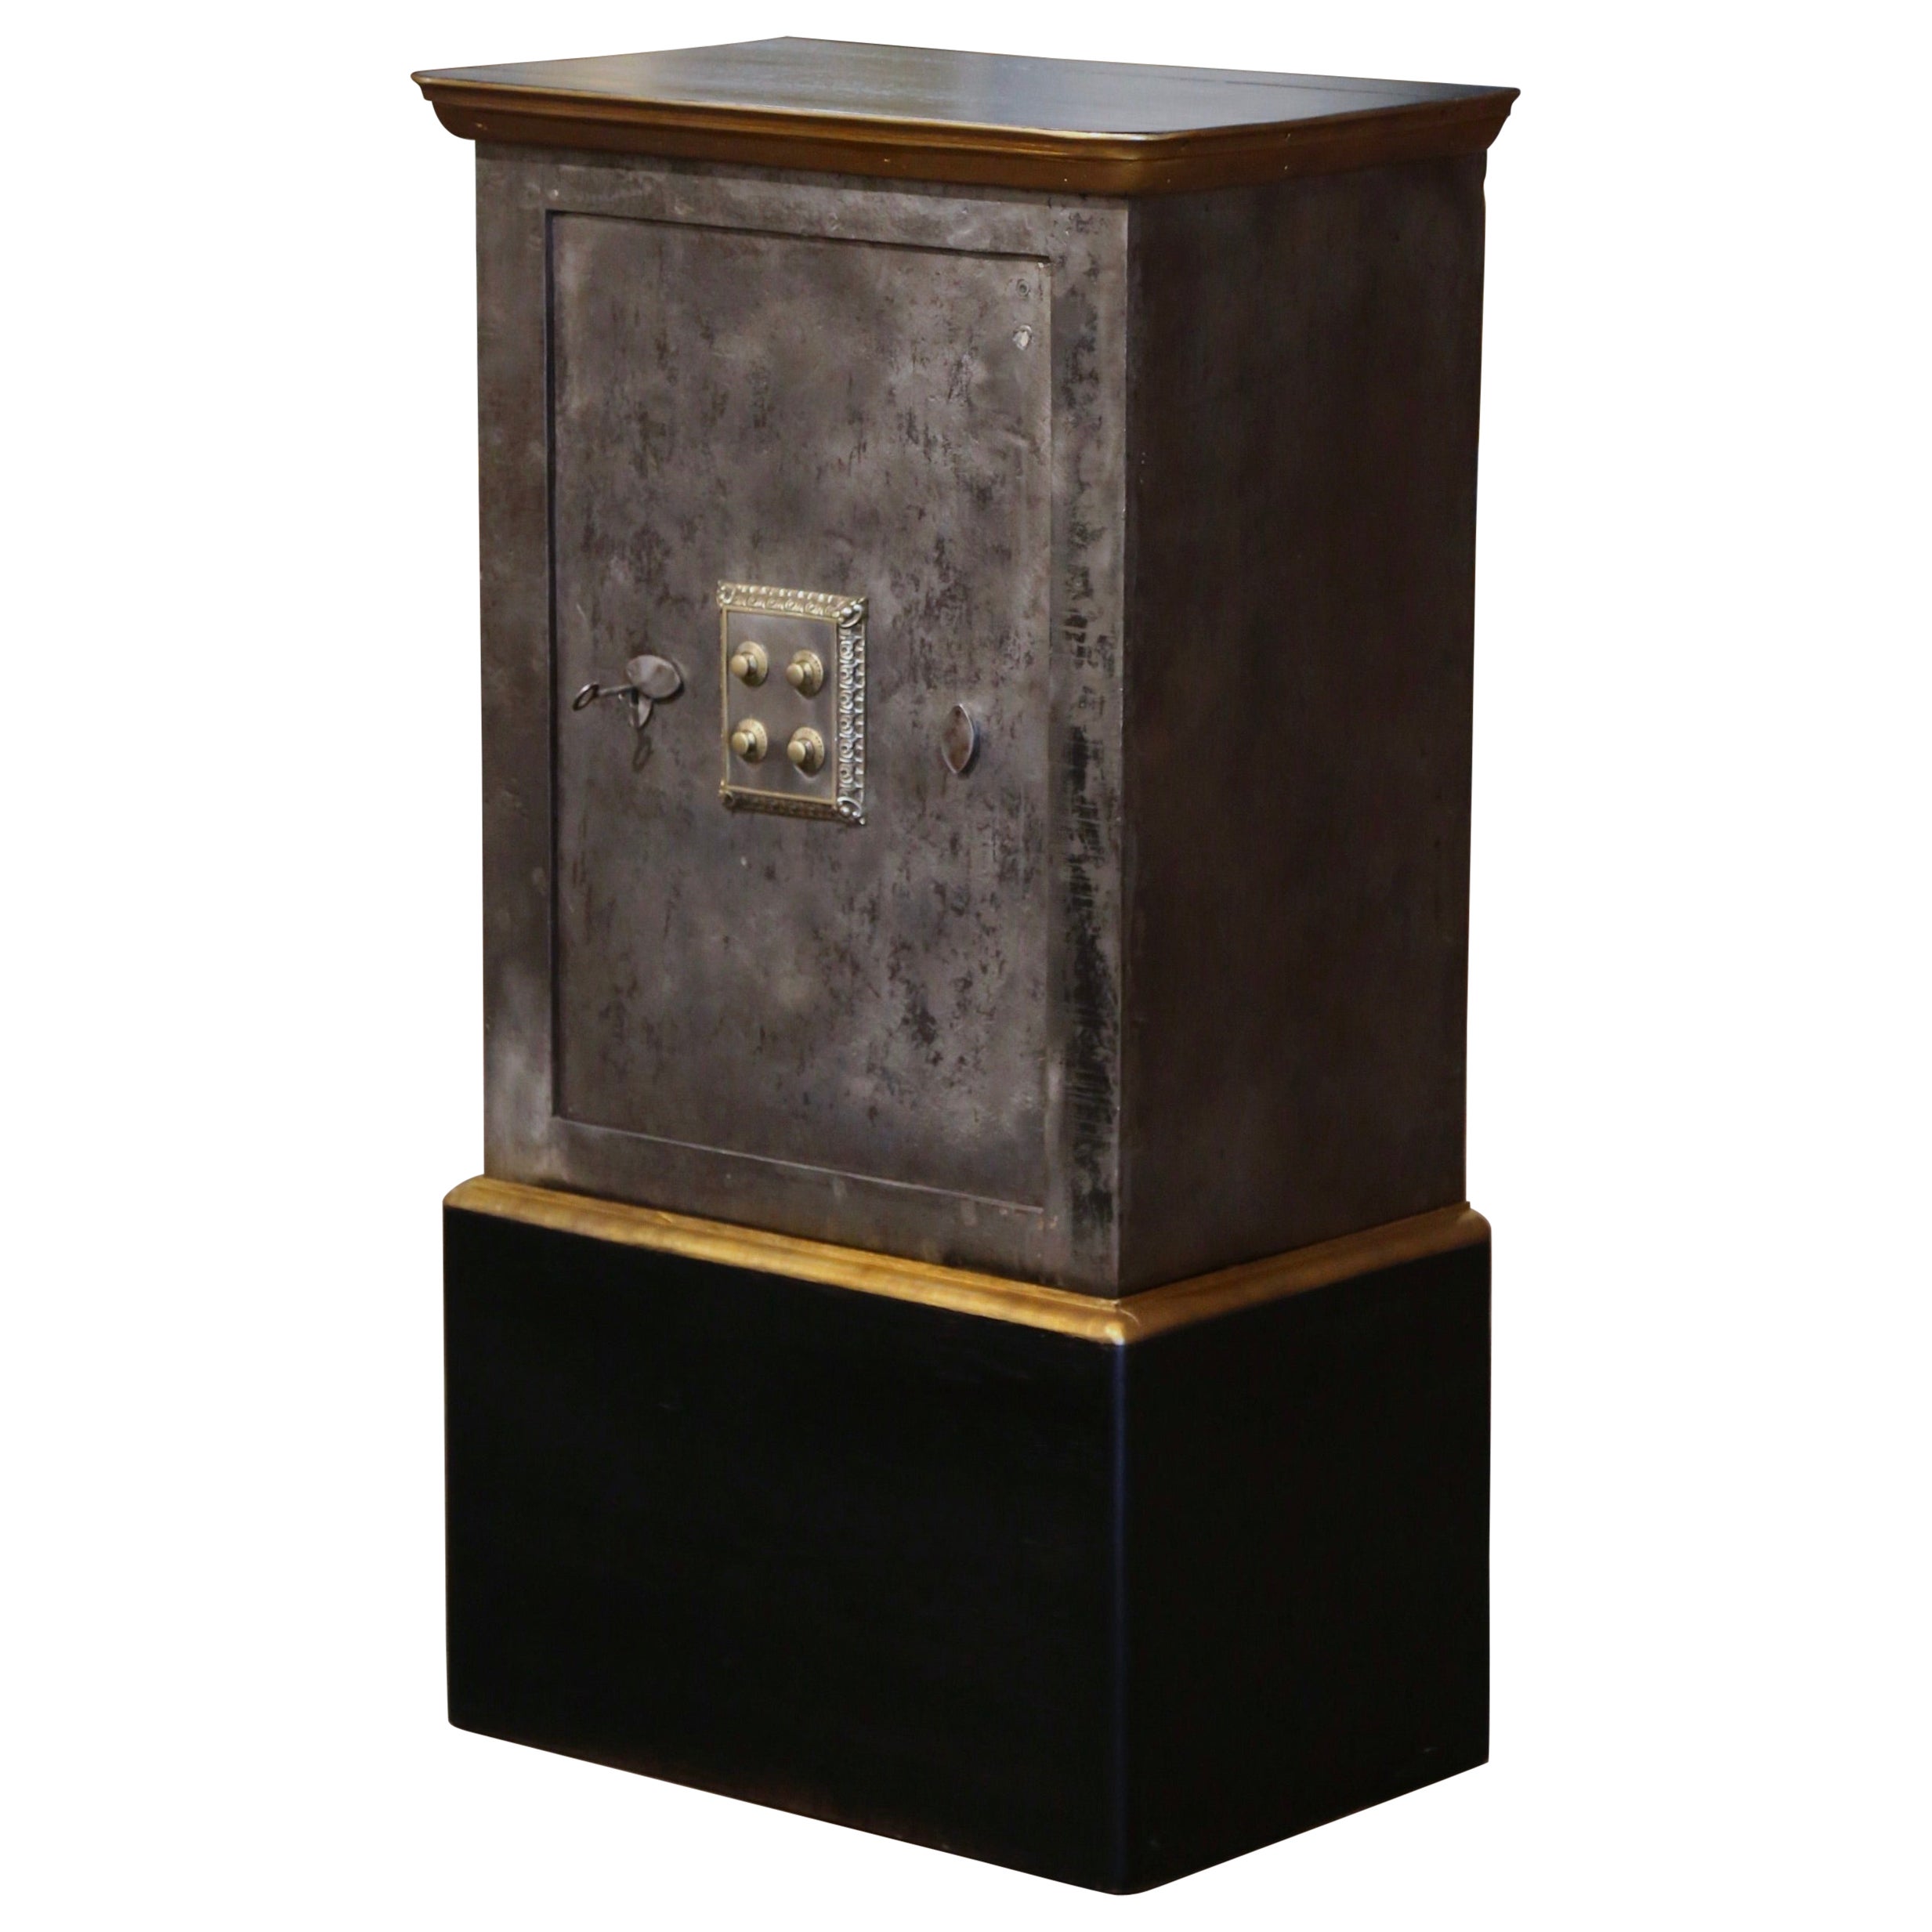 19th Century French Carved Painted Wood and Polished Iron Safe with Combination